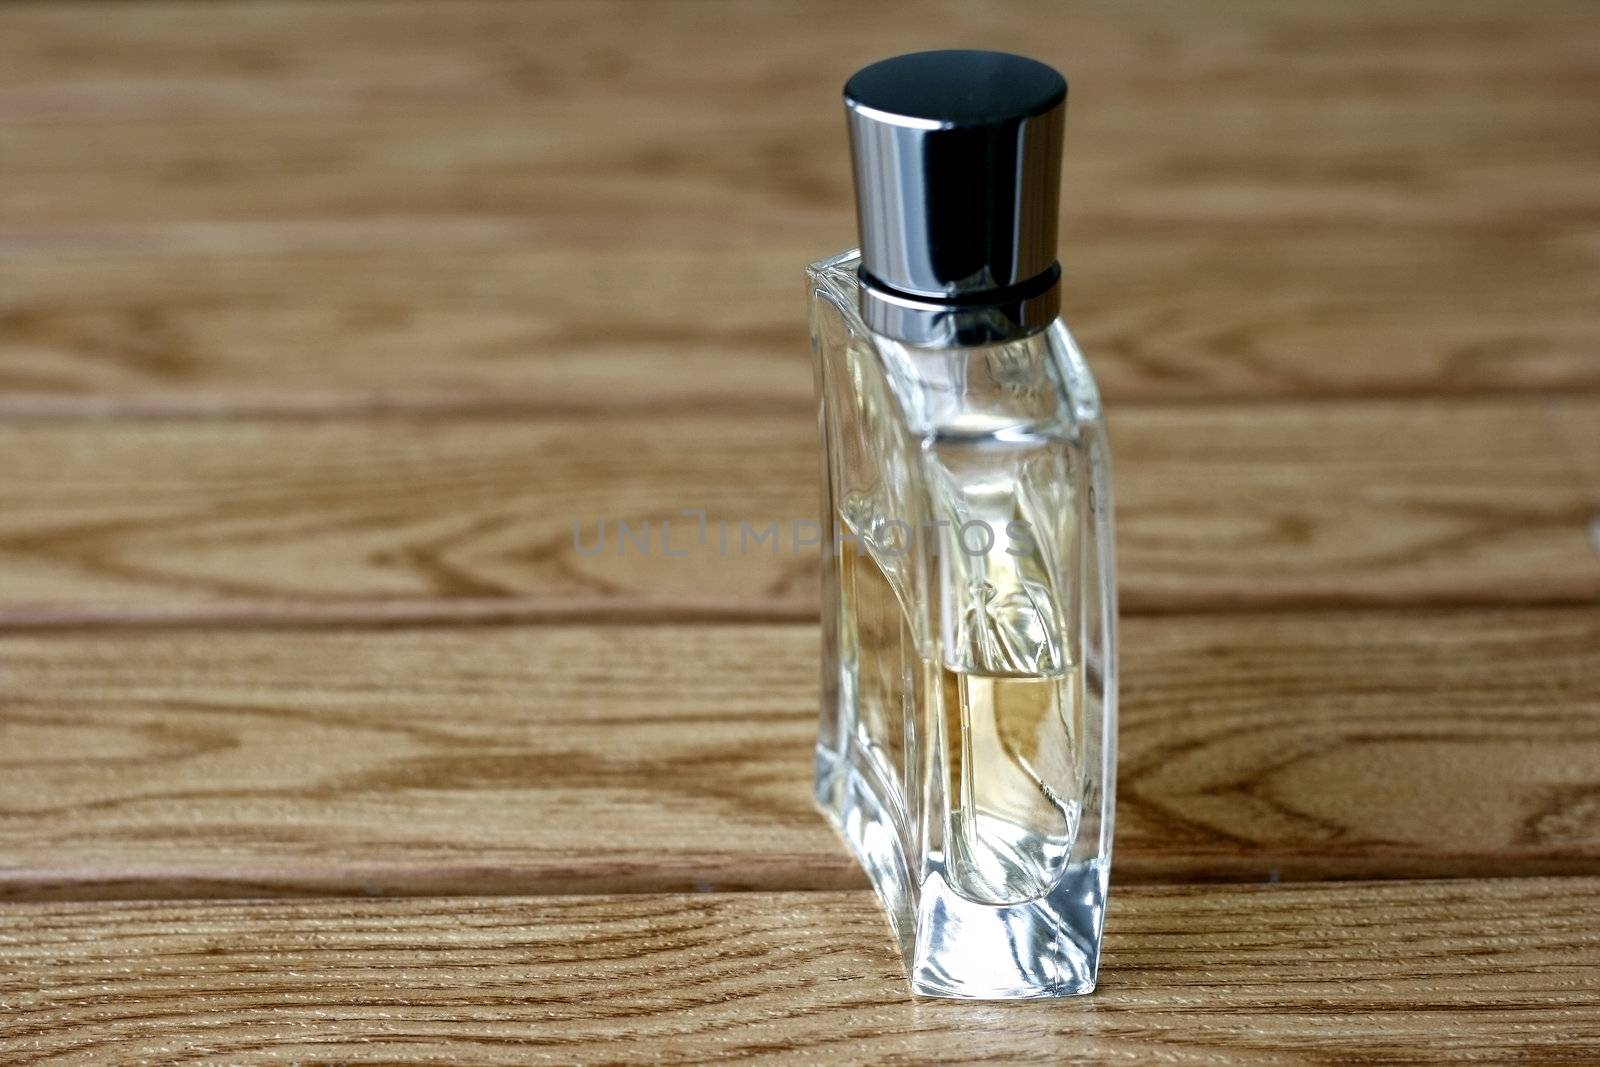 Mens Perfume and Fragrance in a wooden tile background